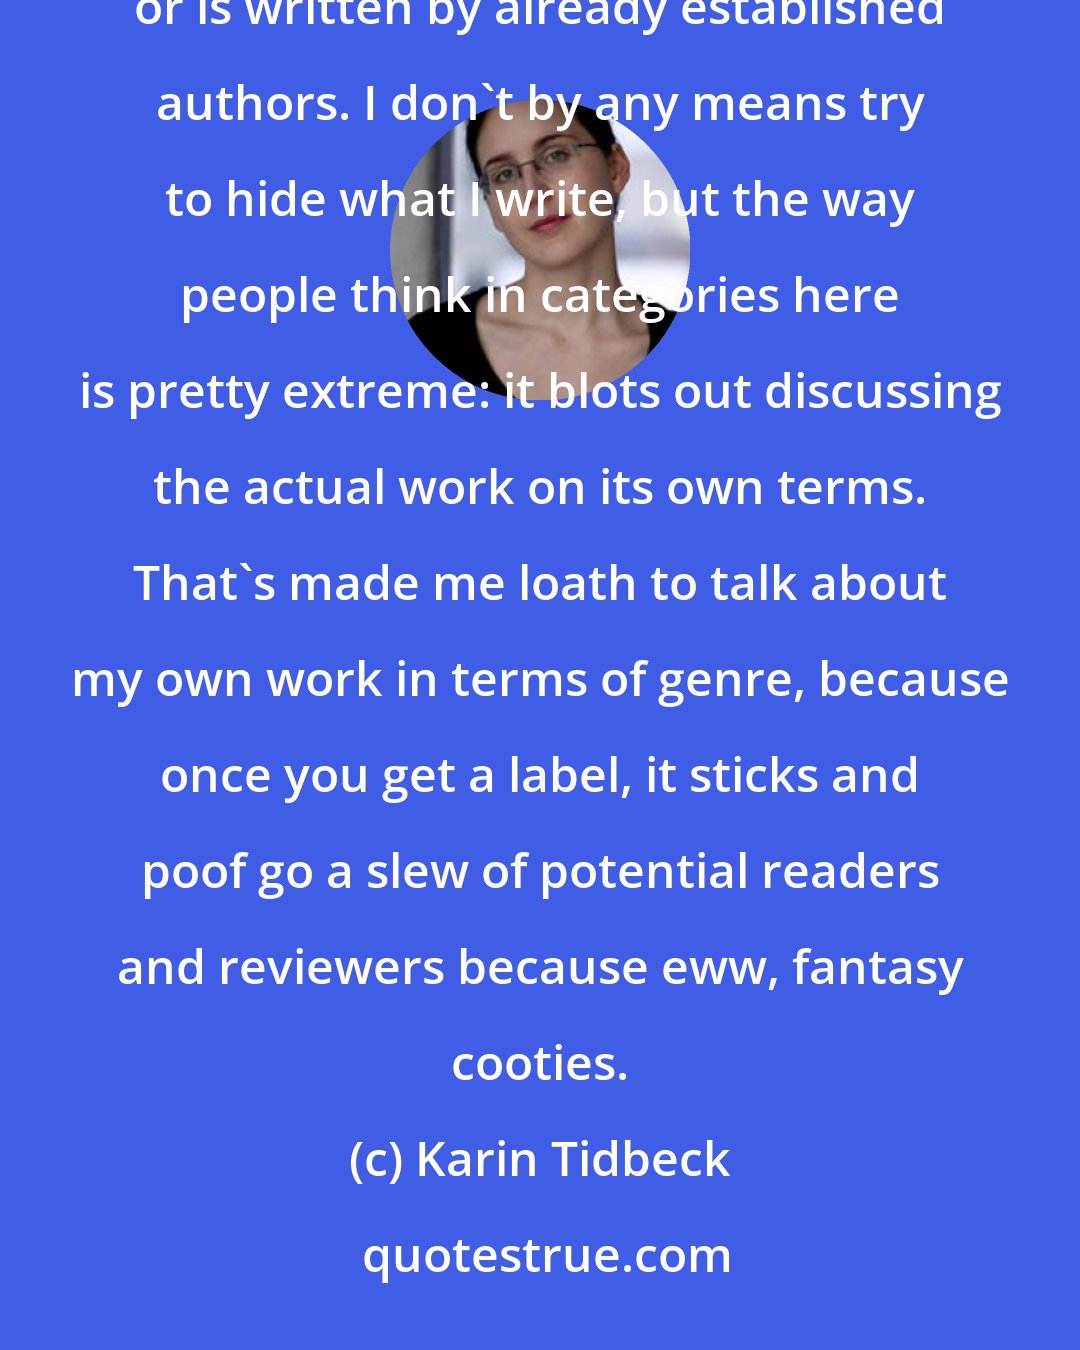 Karin Tidbeck: I come from a nation where fantastic fiction has a very low status, unless it fits into some very specific categories or is written by already established authors. I don't by any means try to hide what I write, but the way people think in categories here is pretty extreme: it blots out discussing the actual work on its own terms. That's made me loath to talk about my own work in terms of genre, because once you get a label, it sticks and poof go a slew of potential readers and reviewers because eww, fantasy cooties.